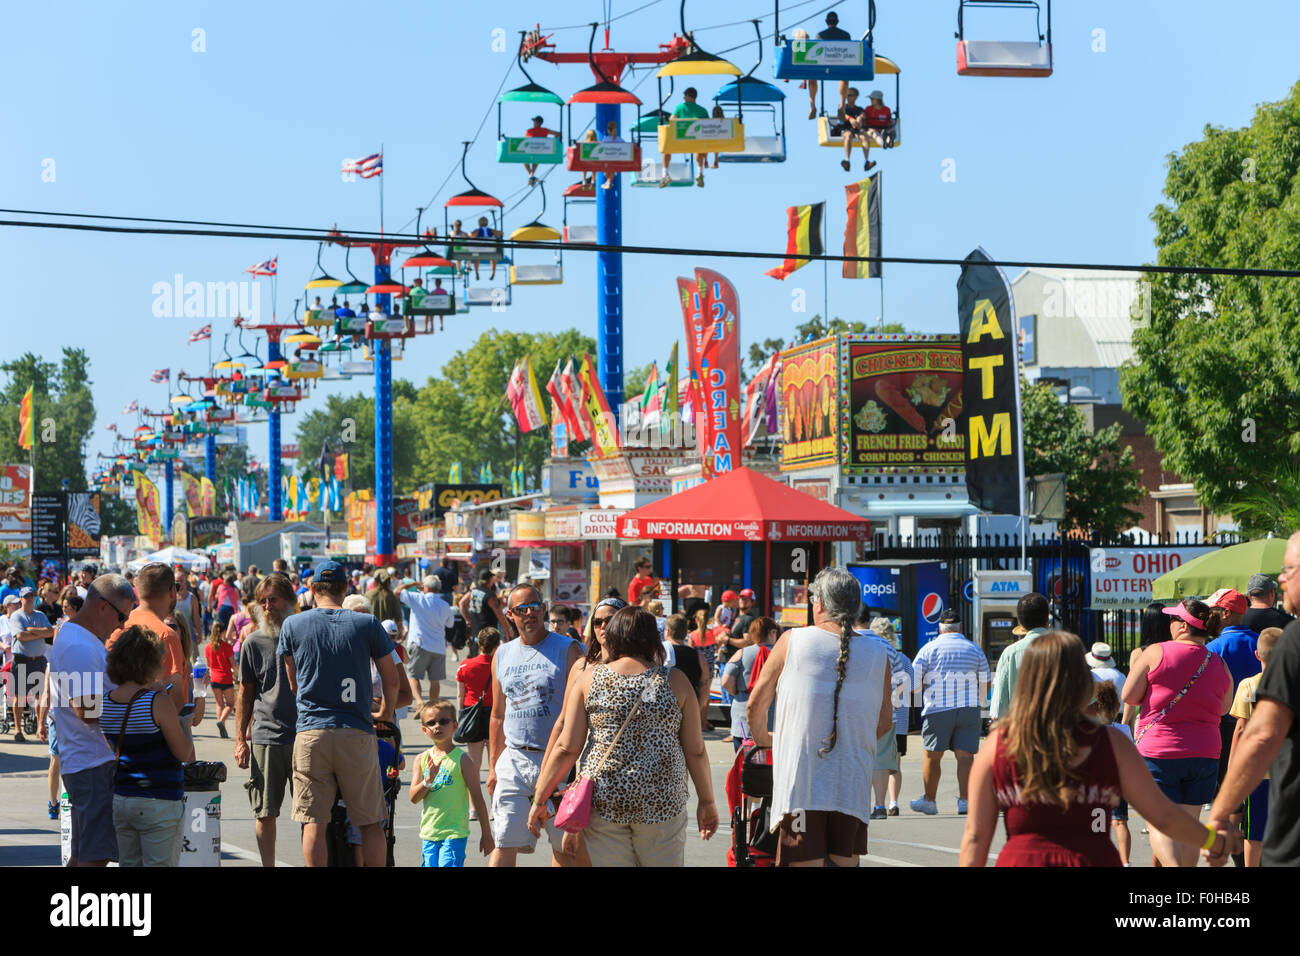 A large crowd walks on the midway at the Ohio State Fair in Columbus, Ohio. Stock Photo